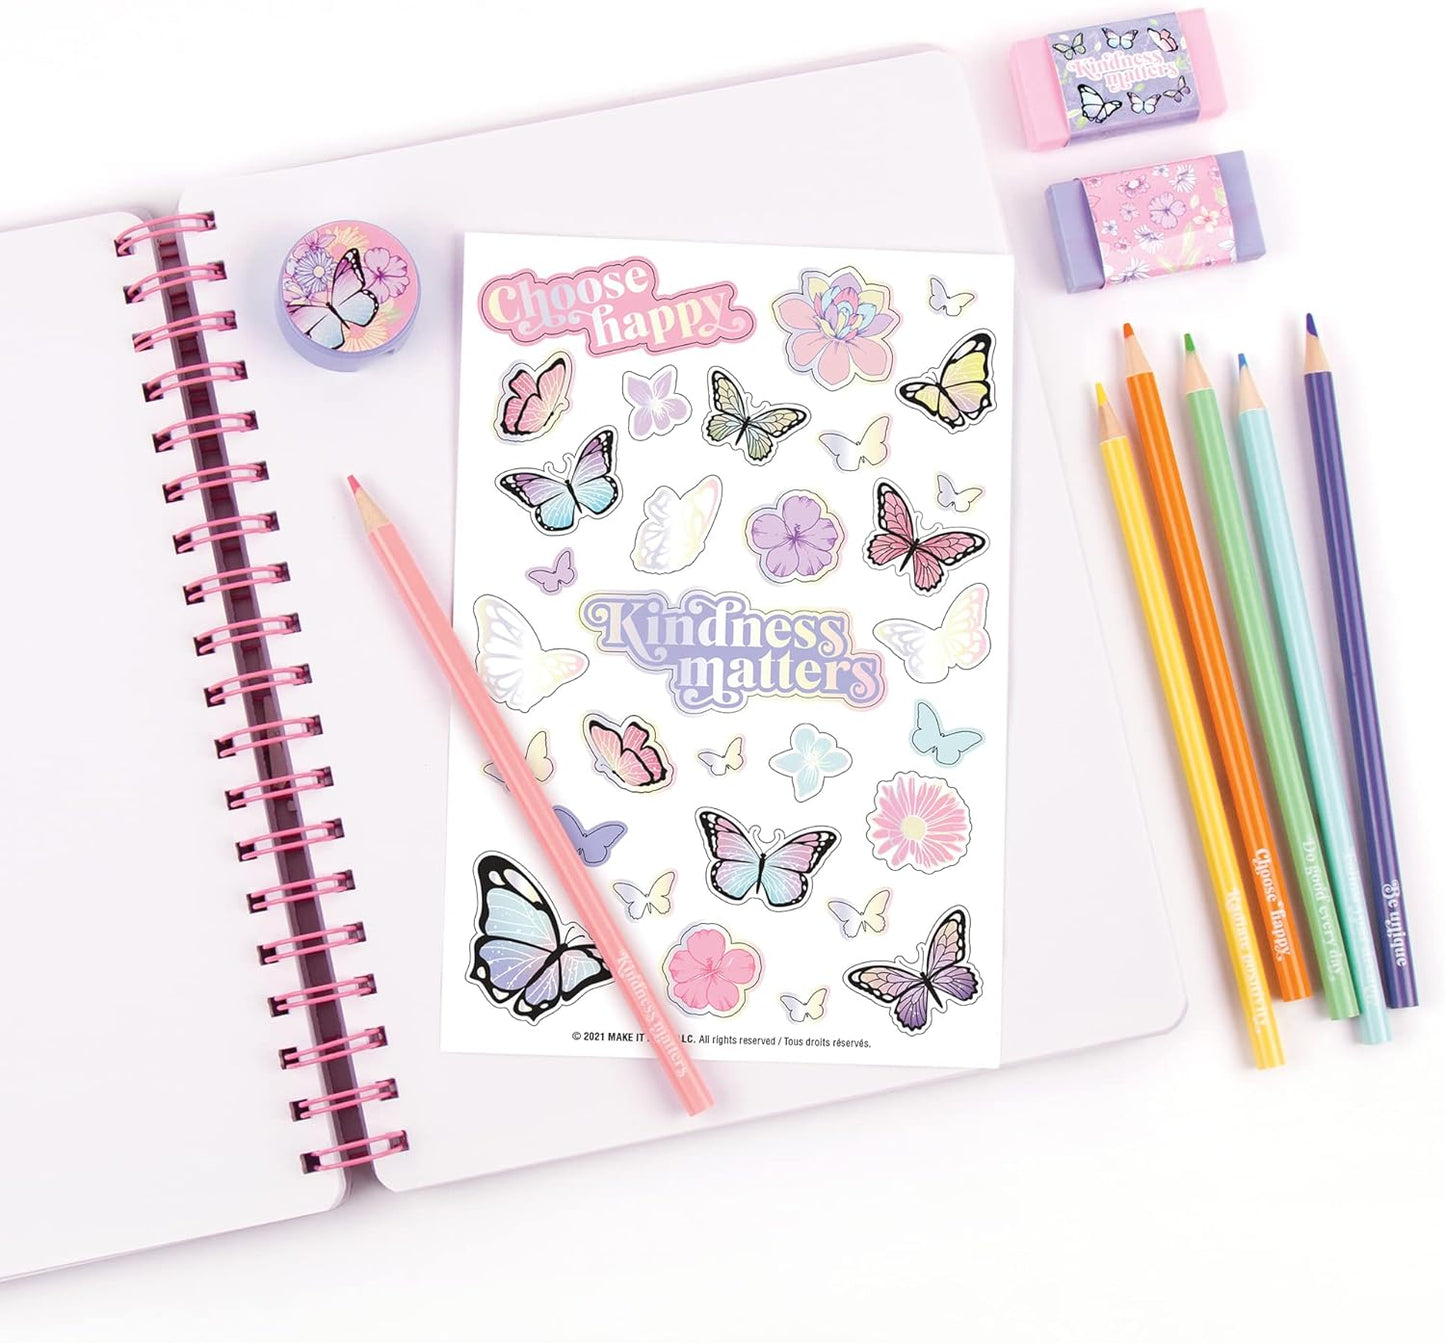 Three Cheers for Girls - Butterfly All-in-1 Sketchbook Set - Girls Diary, Journal, Sketch Book for Kids with Pencils, Stickers & More